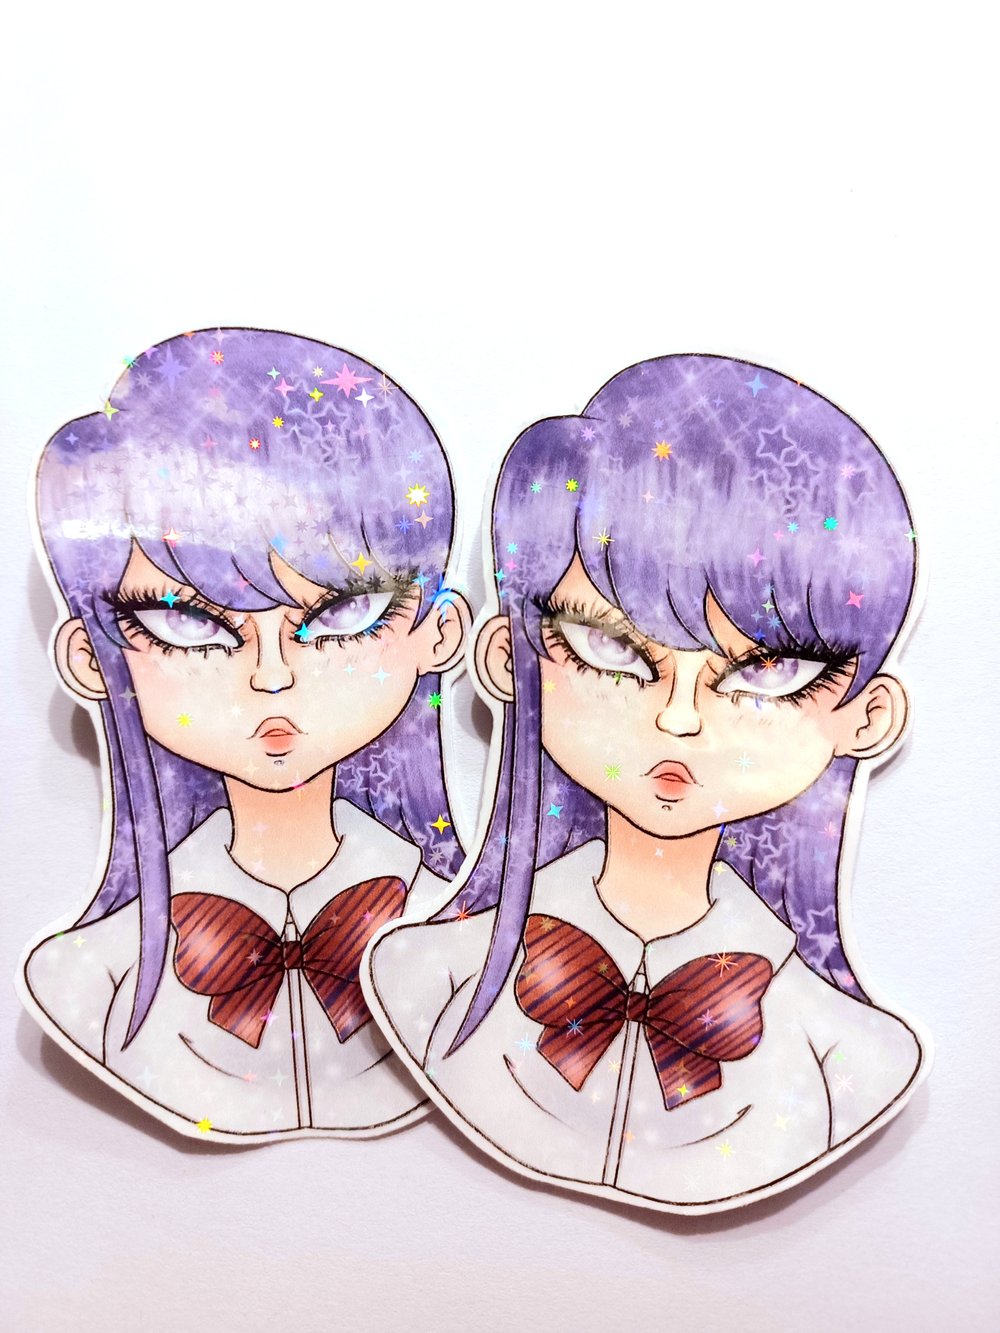 Image of Komi Cant Communicate Stickers